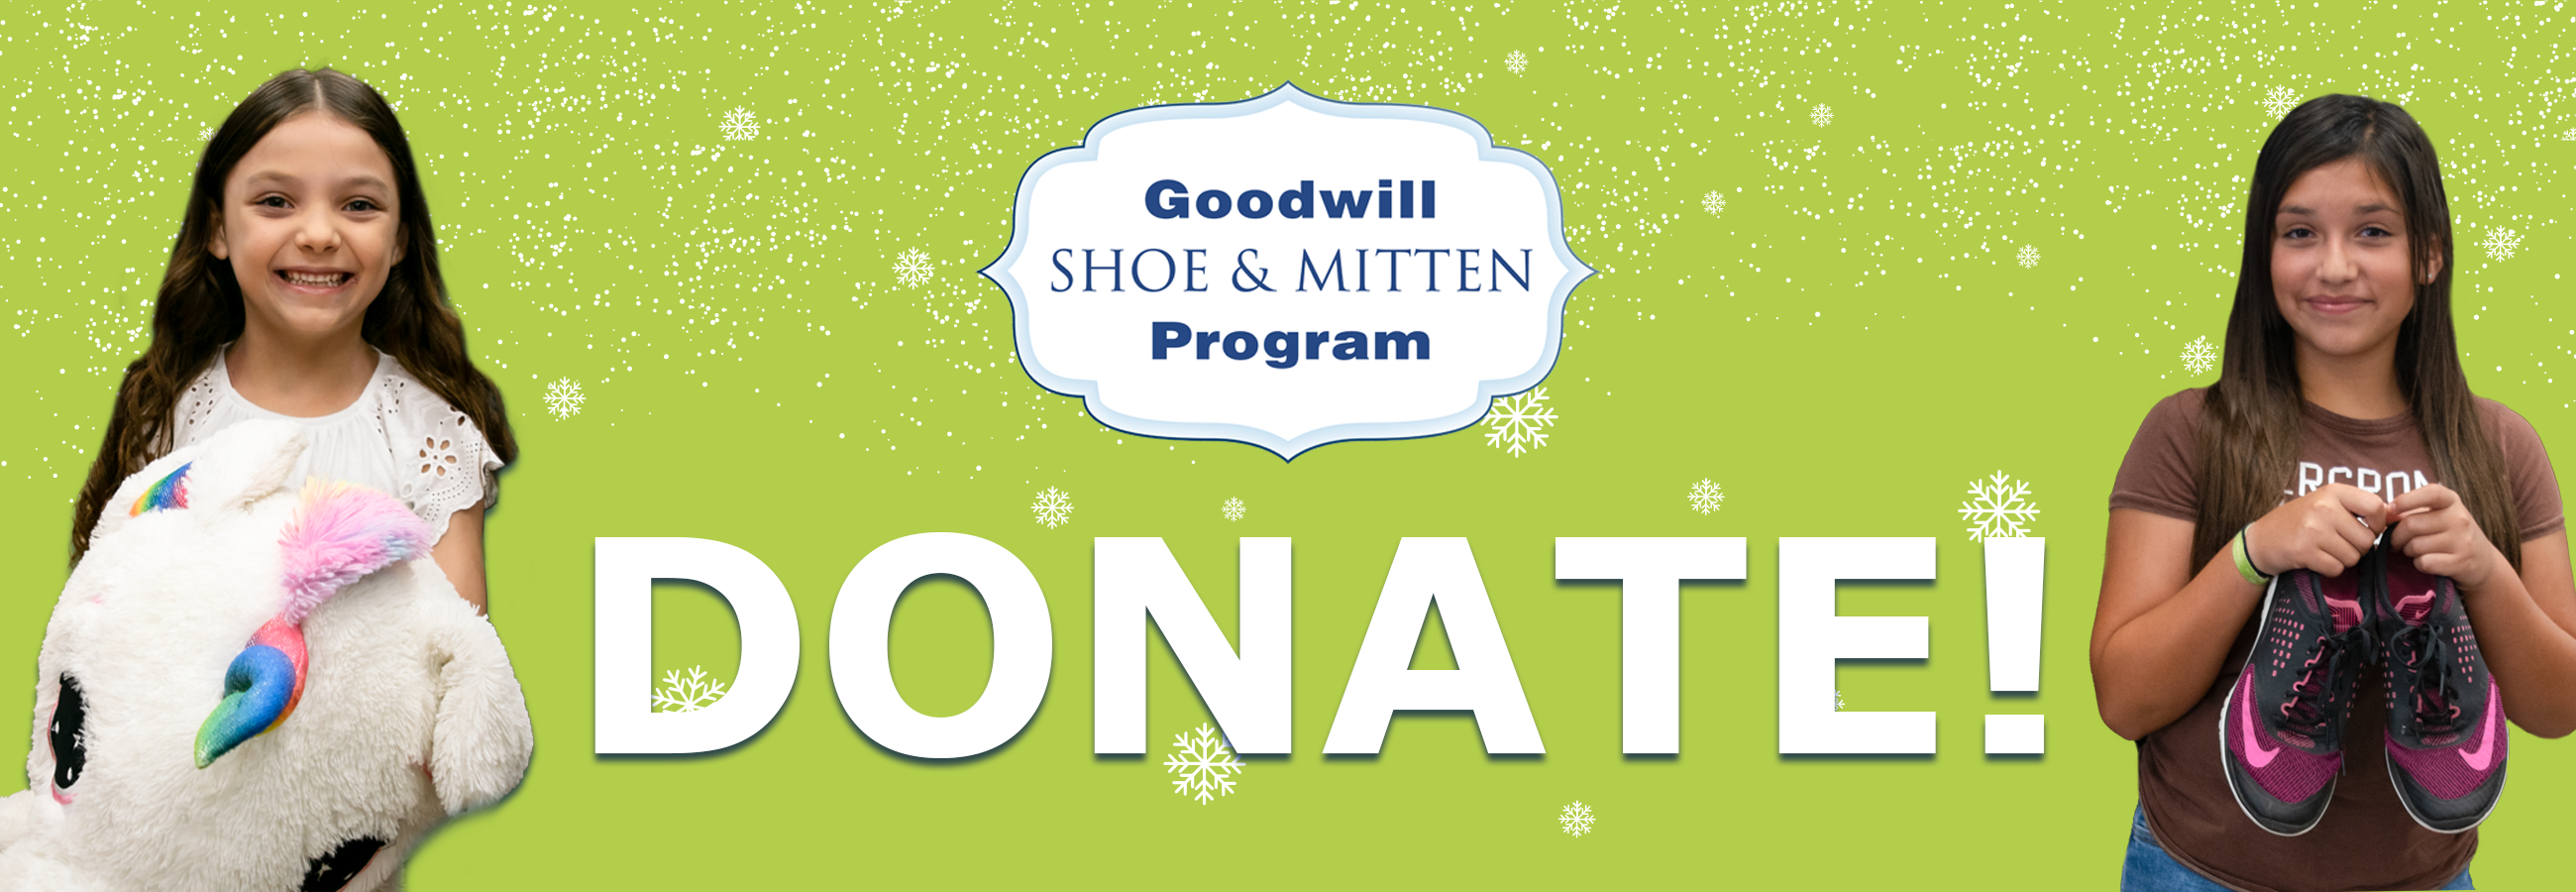 Donate to Goodwill Shoe and Mitten Program